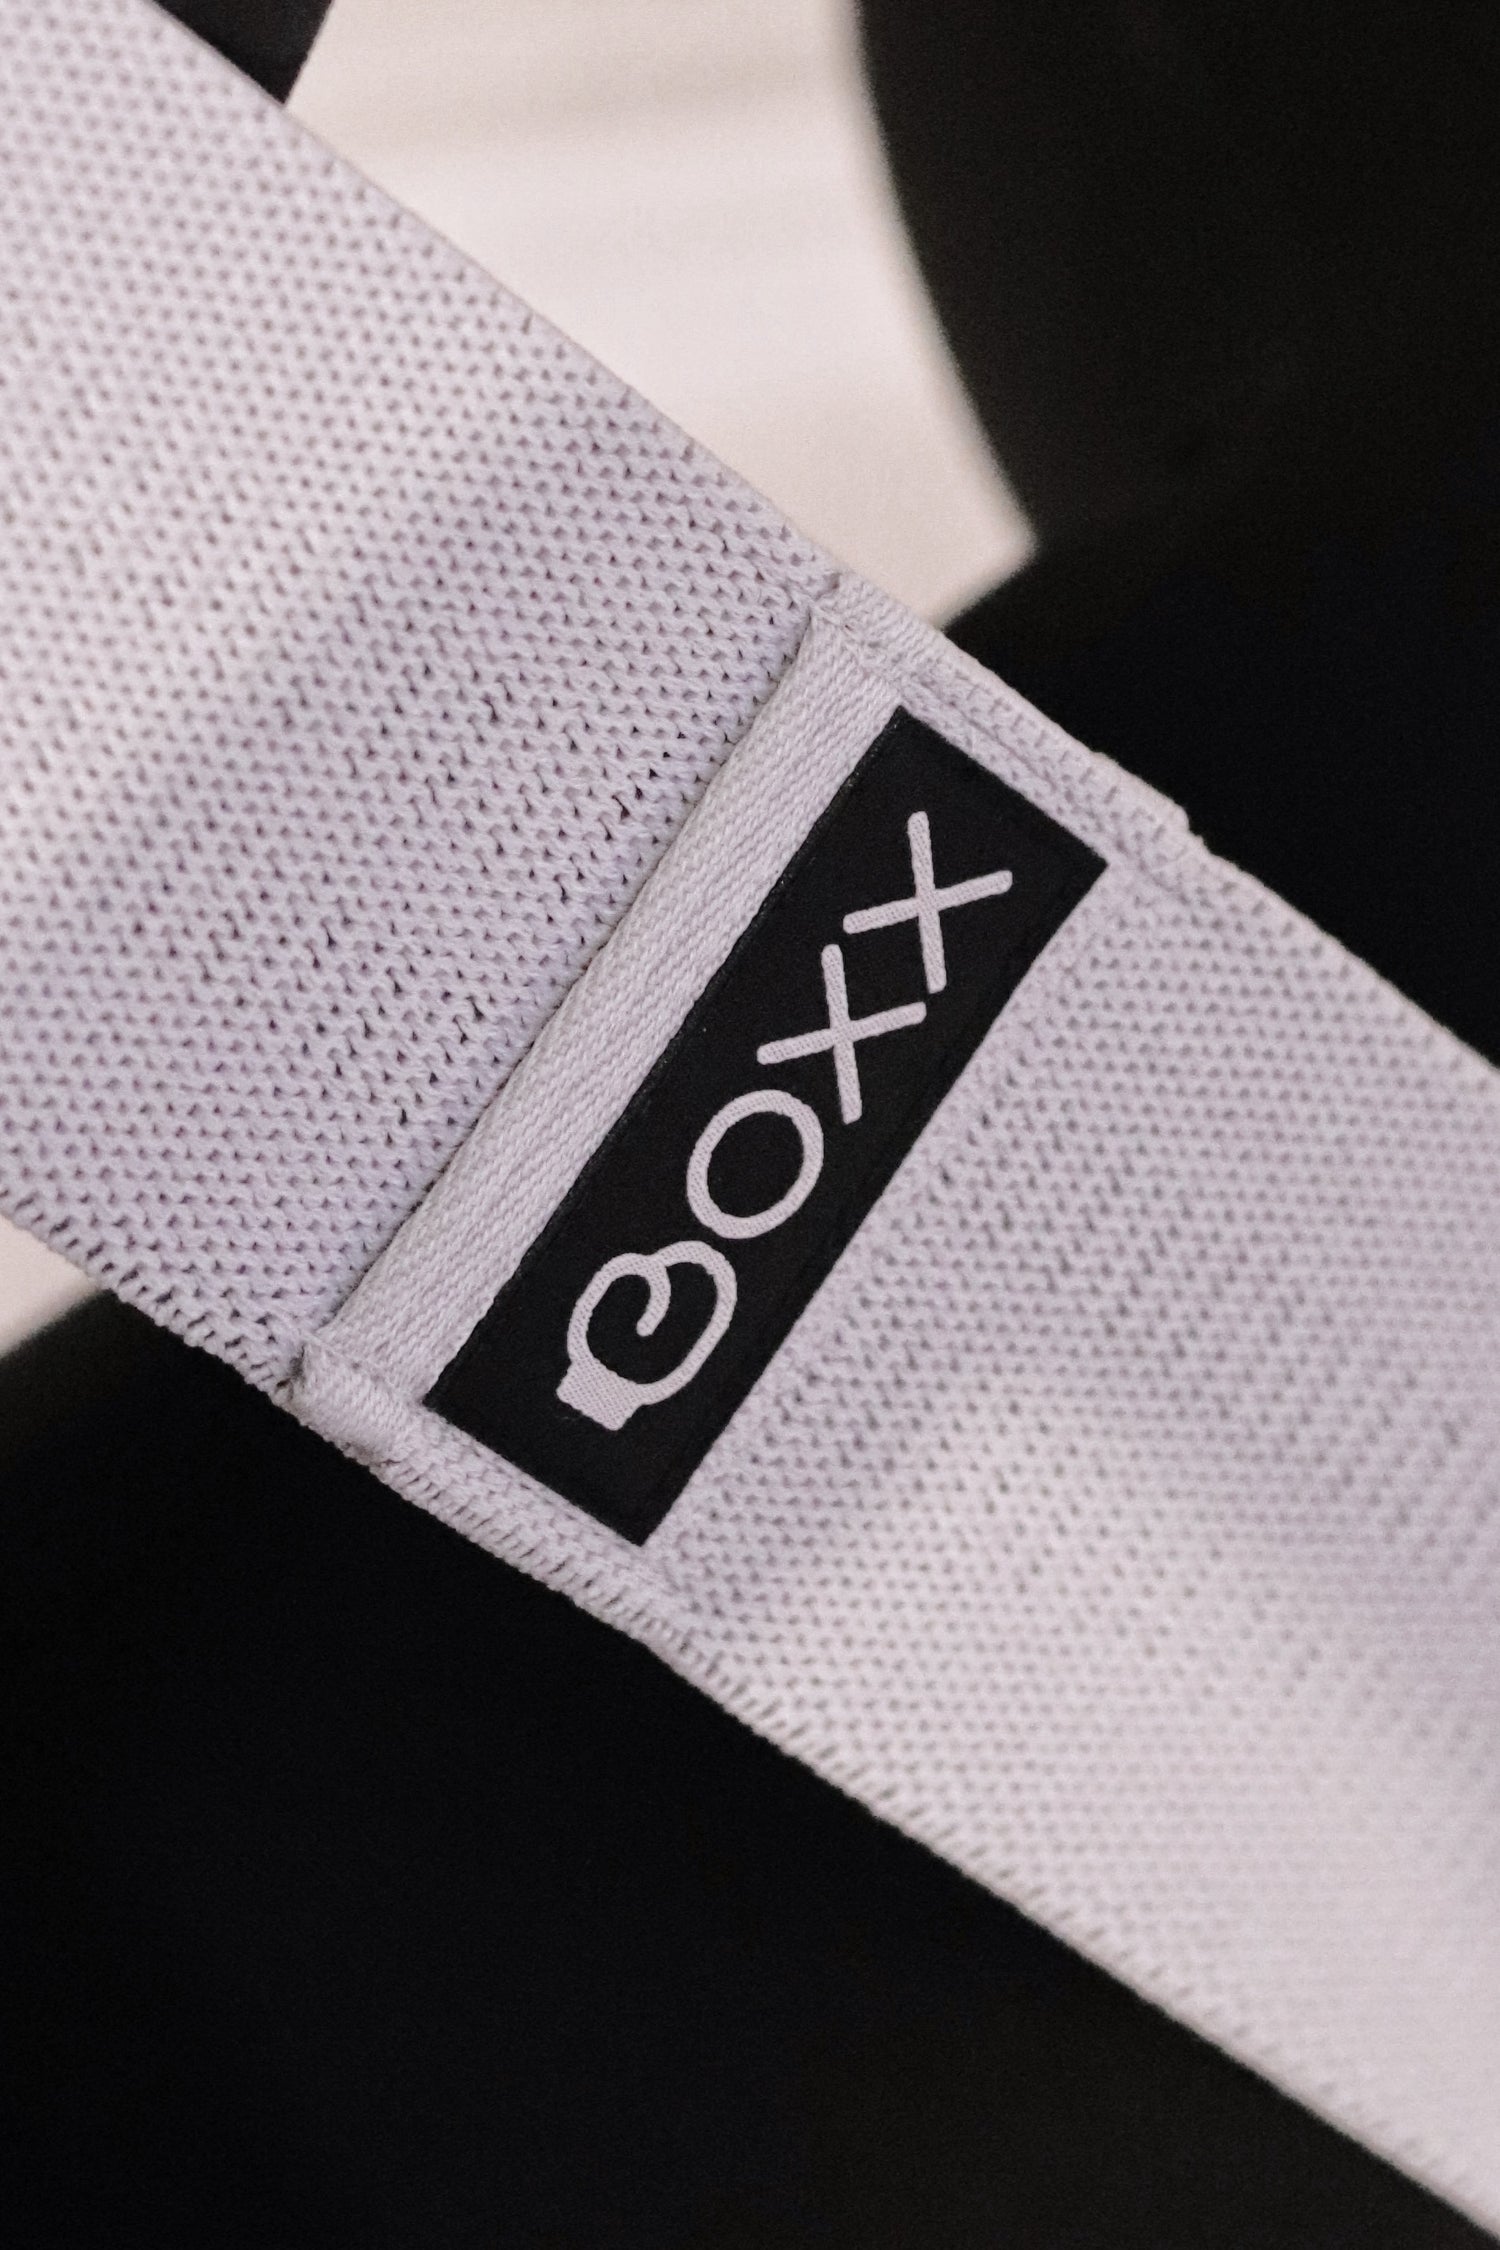 BoxxBANDS